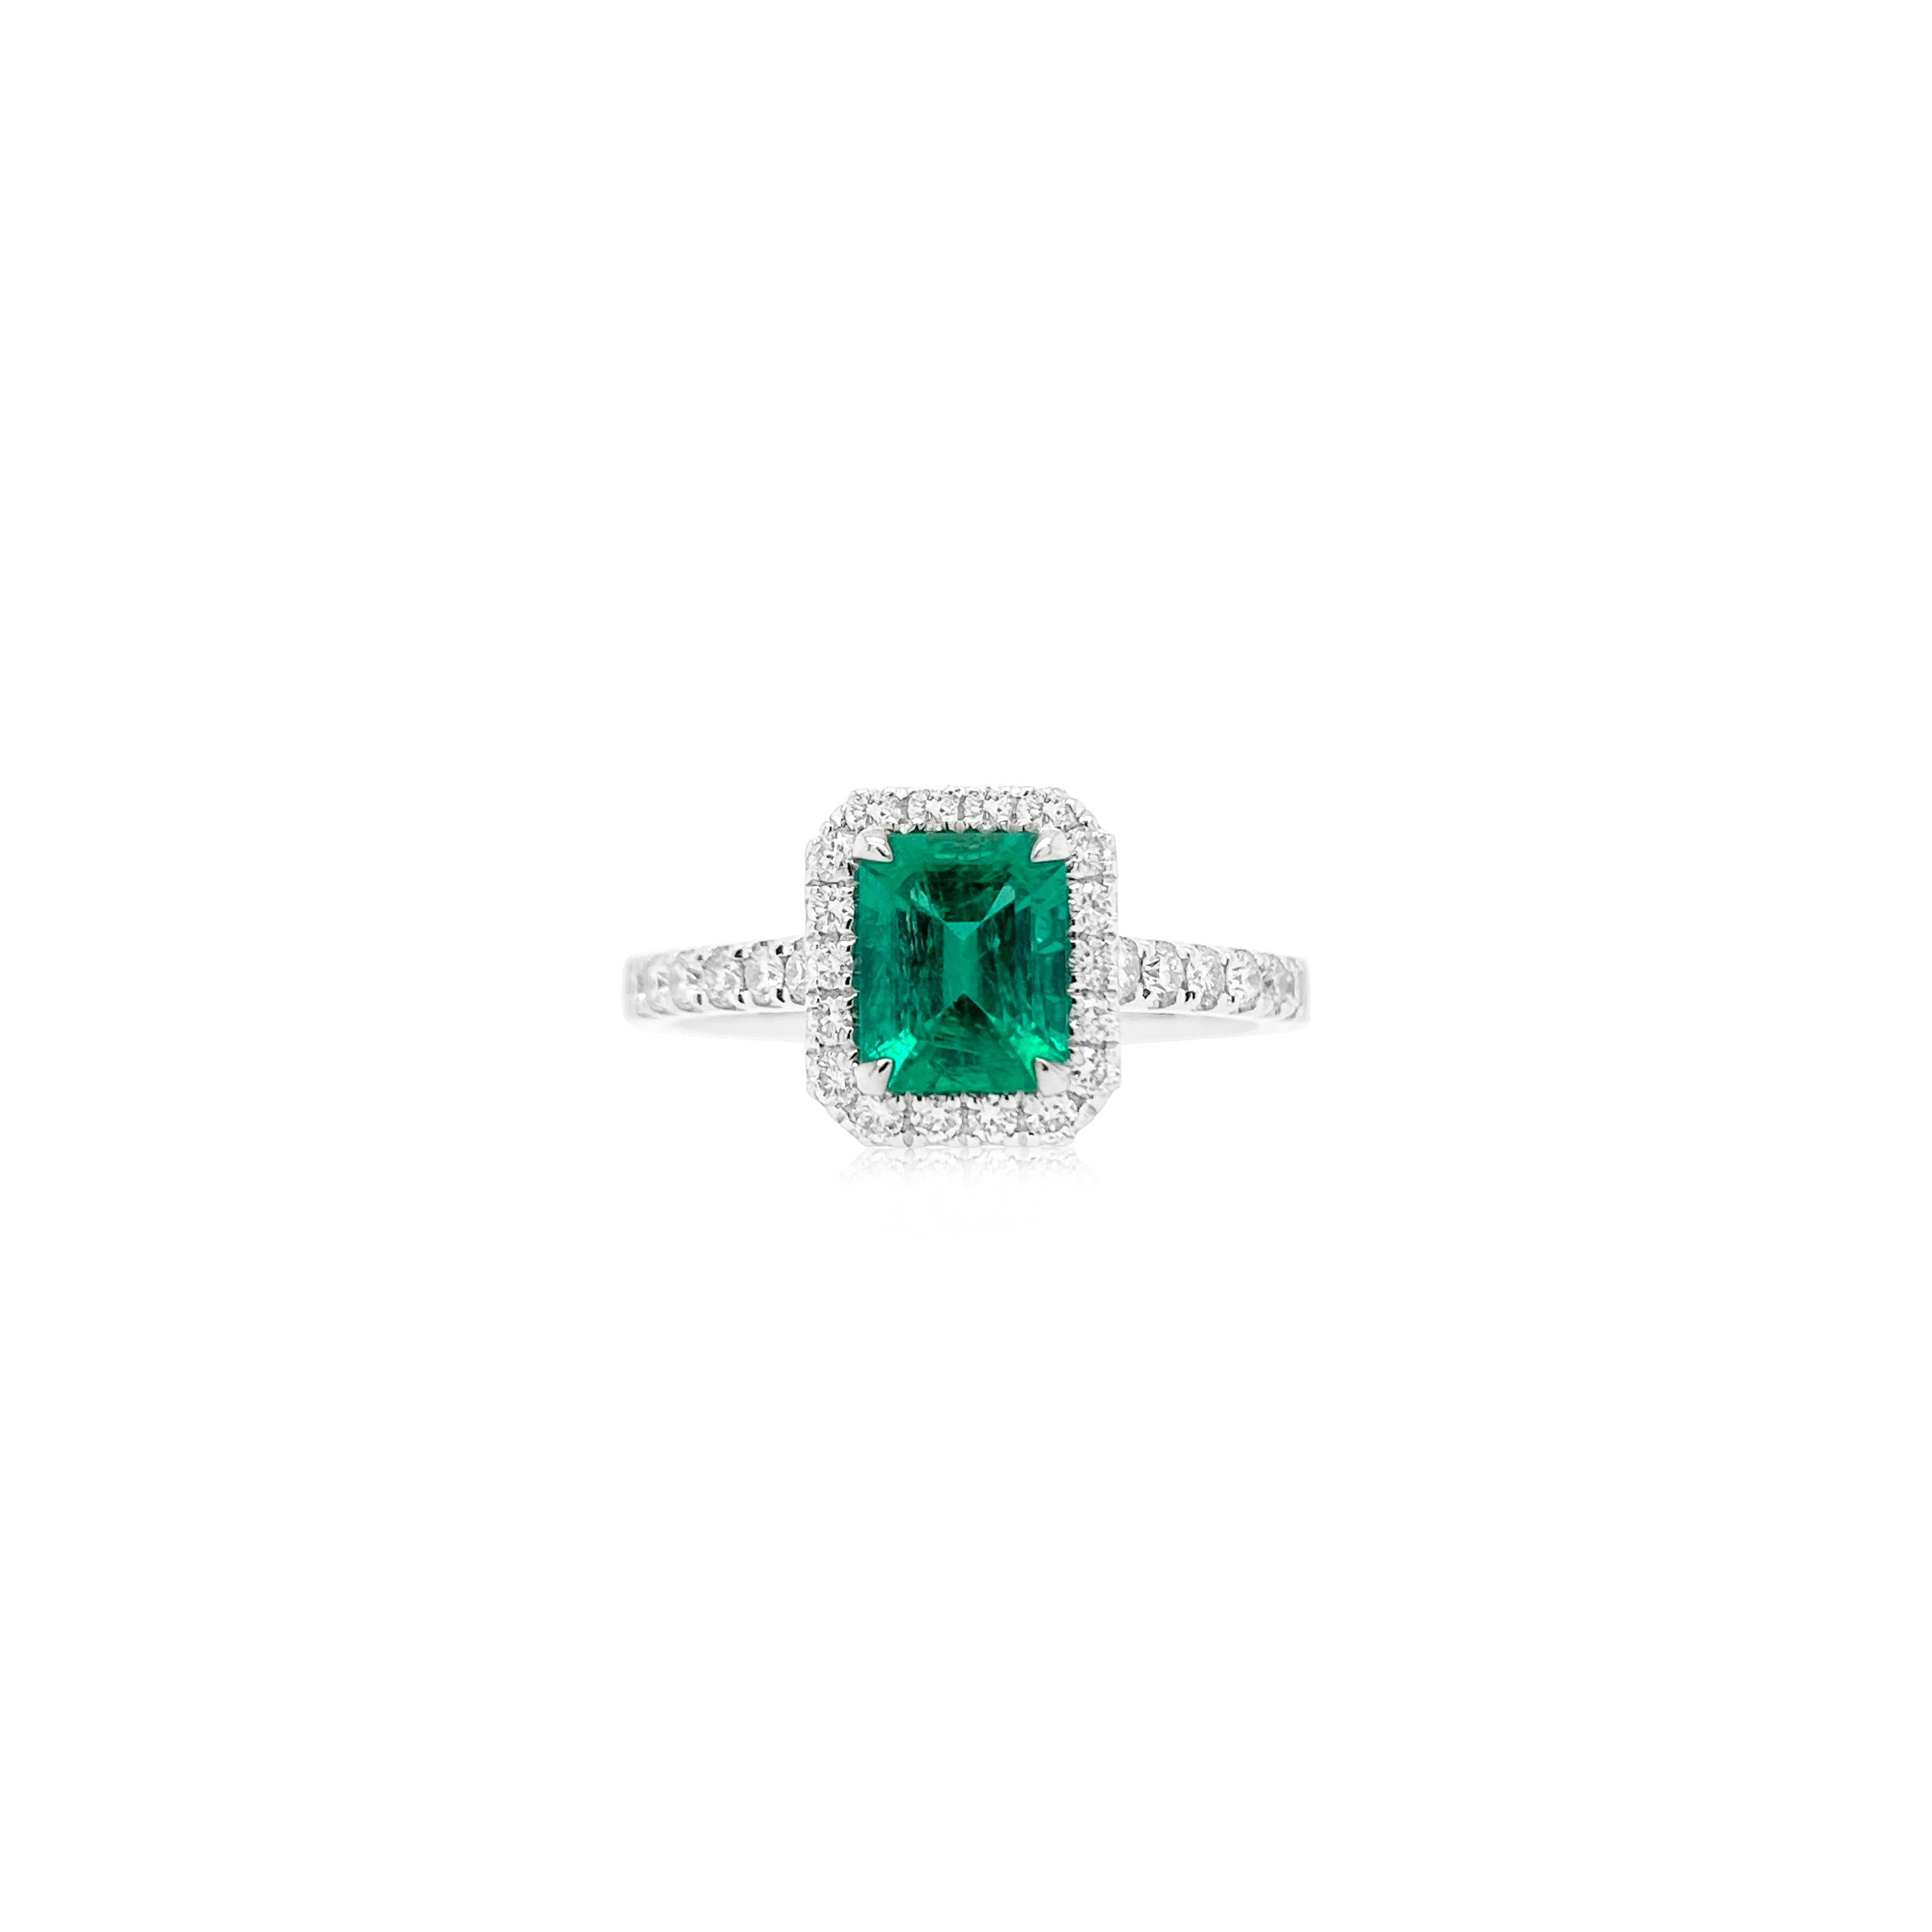 This Colombian emerald ring is a testament to authenticity, celebrated for its natural inclusions. These imperfections, unique to genuine emeralds, distinguish them from lab-created counterparts, adding character and validating their Earthly origin.